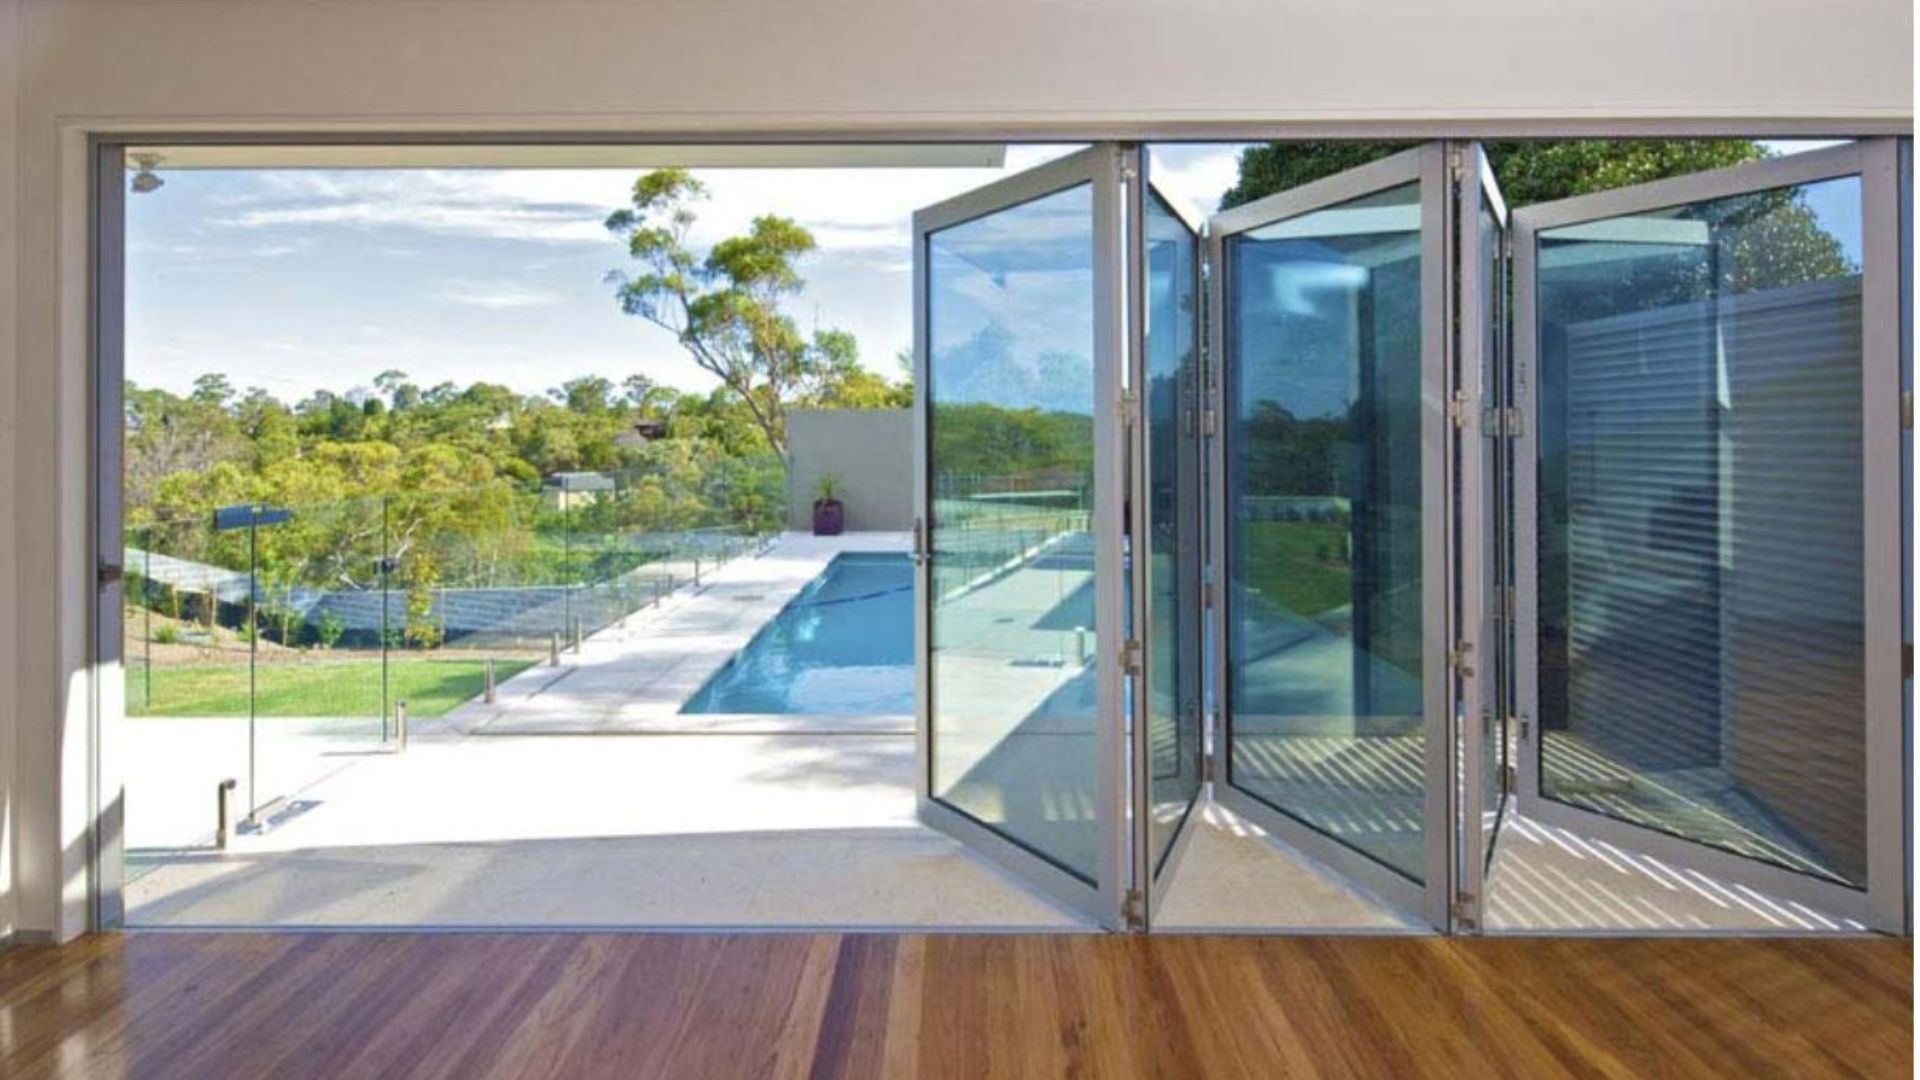 What Are the Benefits of Frameless Glass Doors